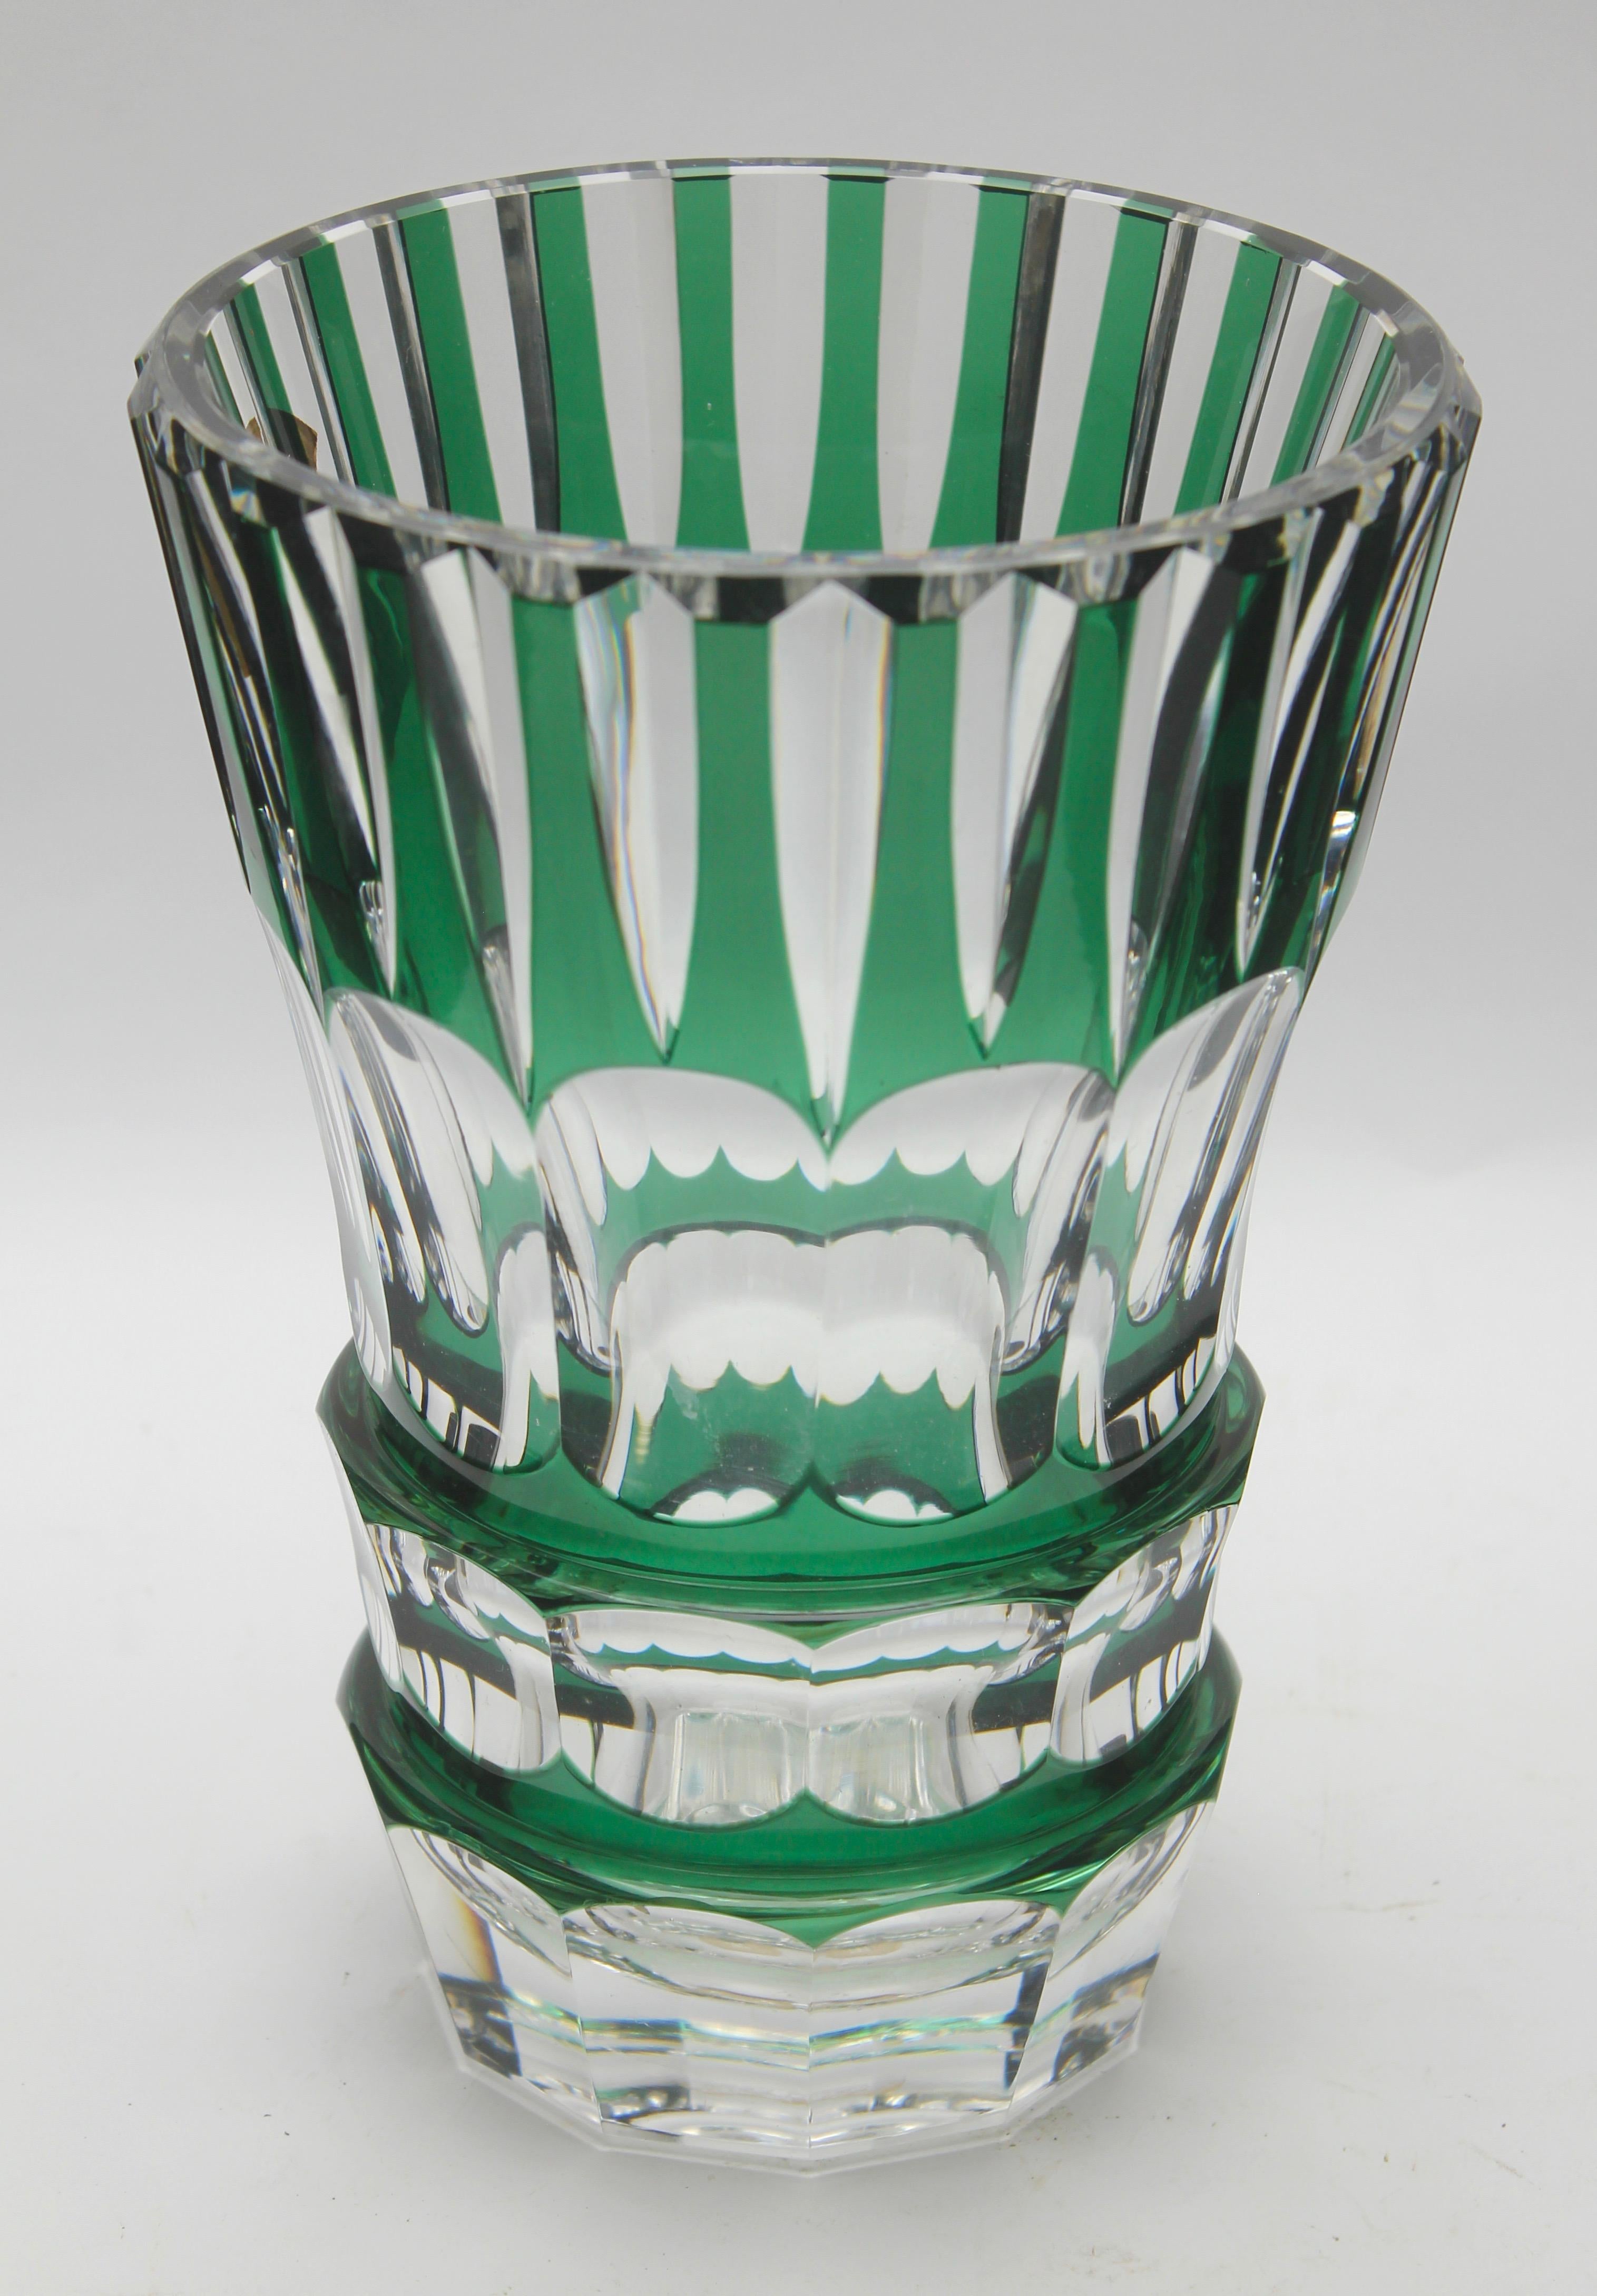 Faceted Val Saint Lambert Crystal Vase Charles Graffart Cut-to-Clear Signed, PU 'Unica'